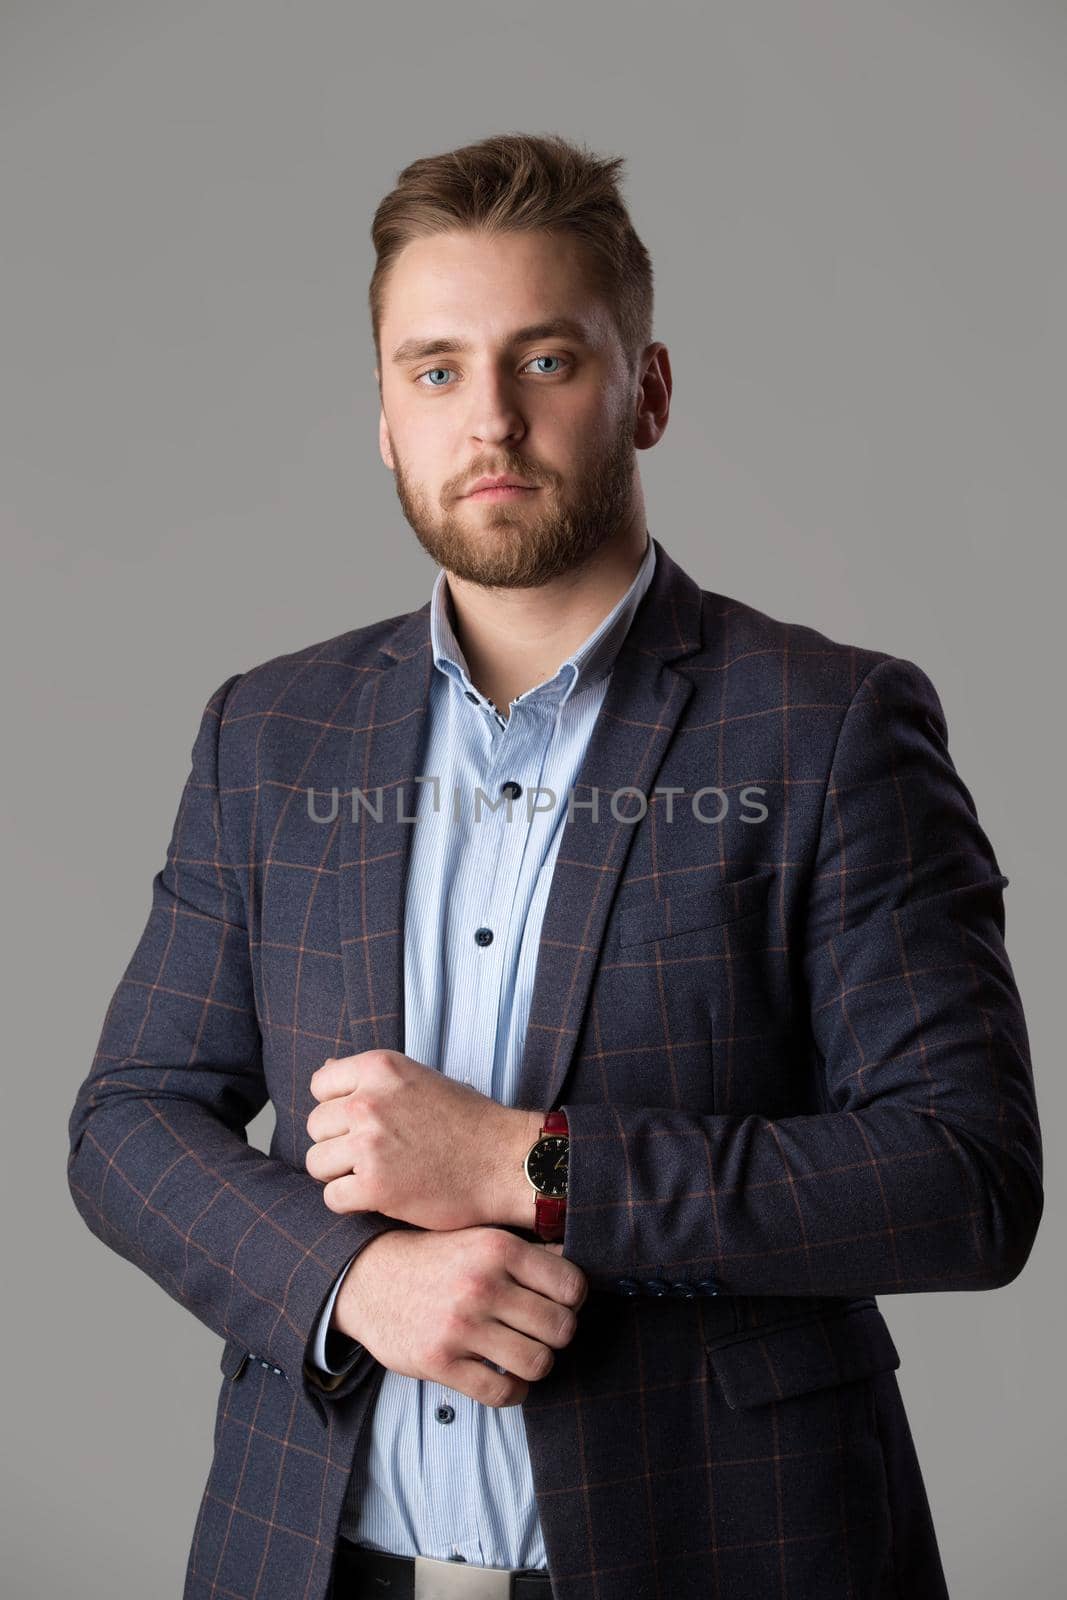 A handsome bearded man in a jacket and shirt on a gray background looks at the camera. by Sviatlana